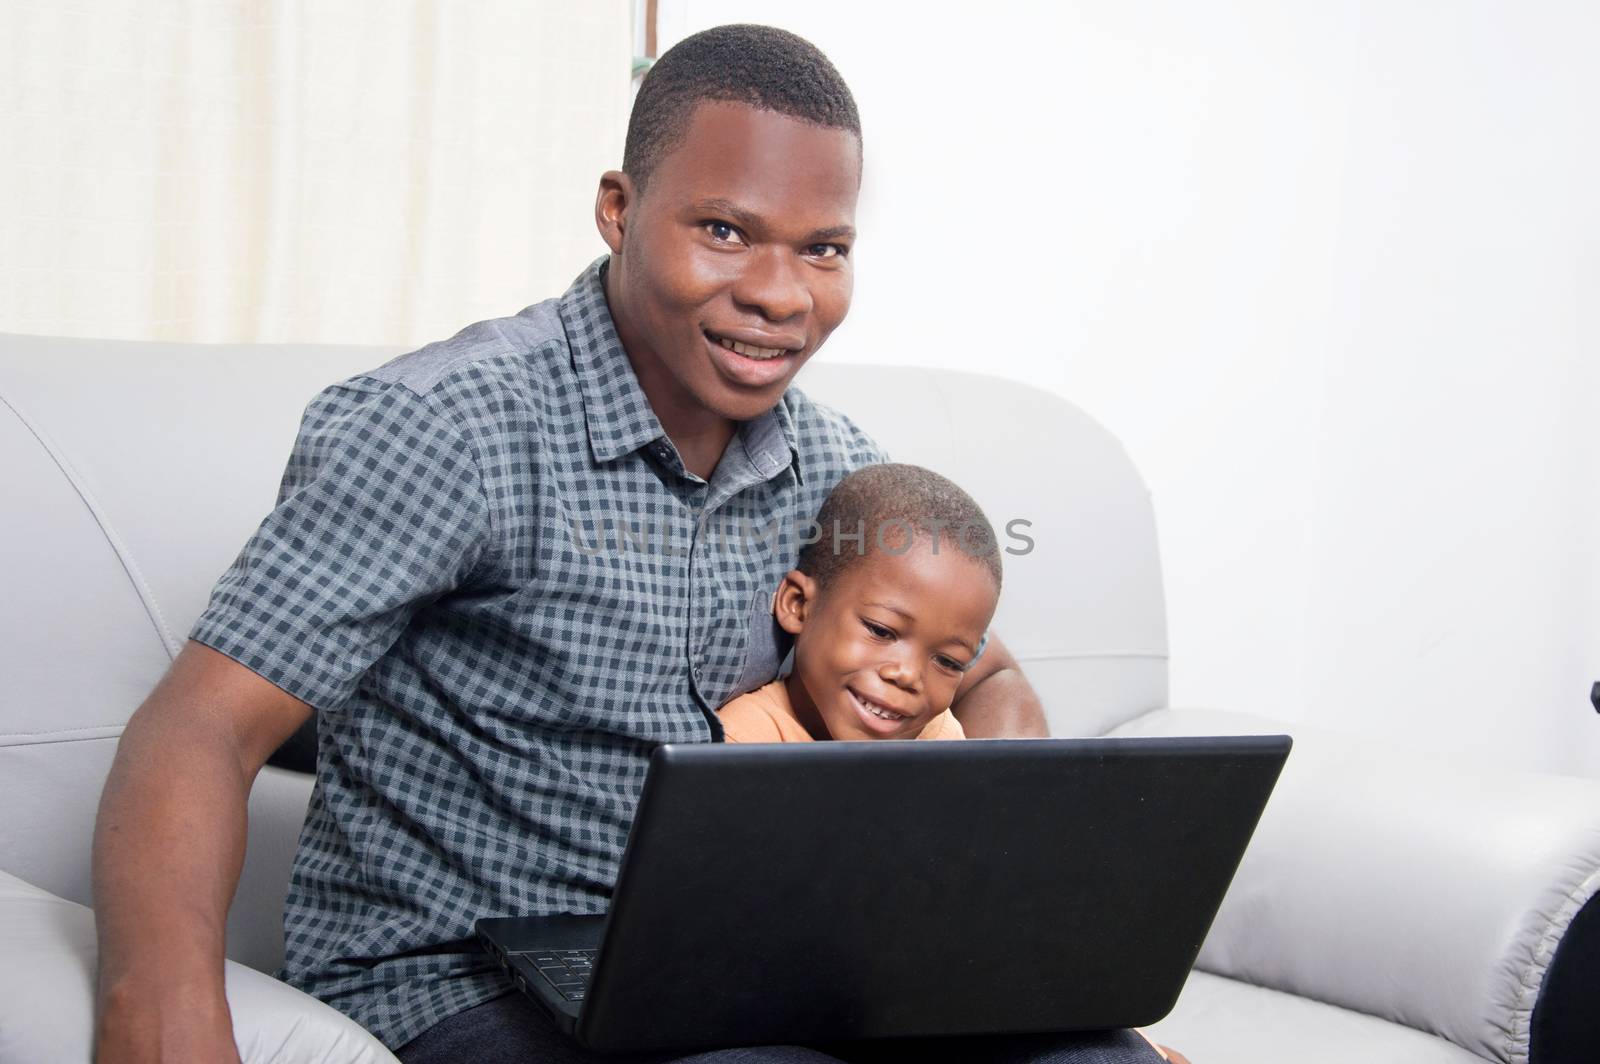 The child is concentrated on the laptop while his father watched the camera.